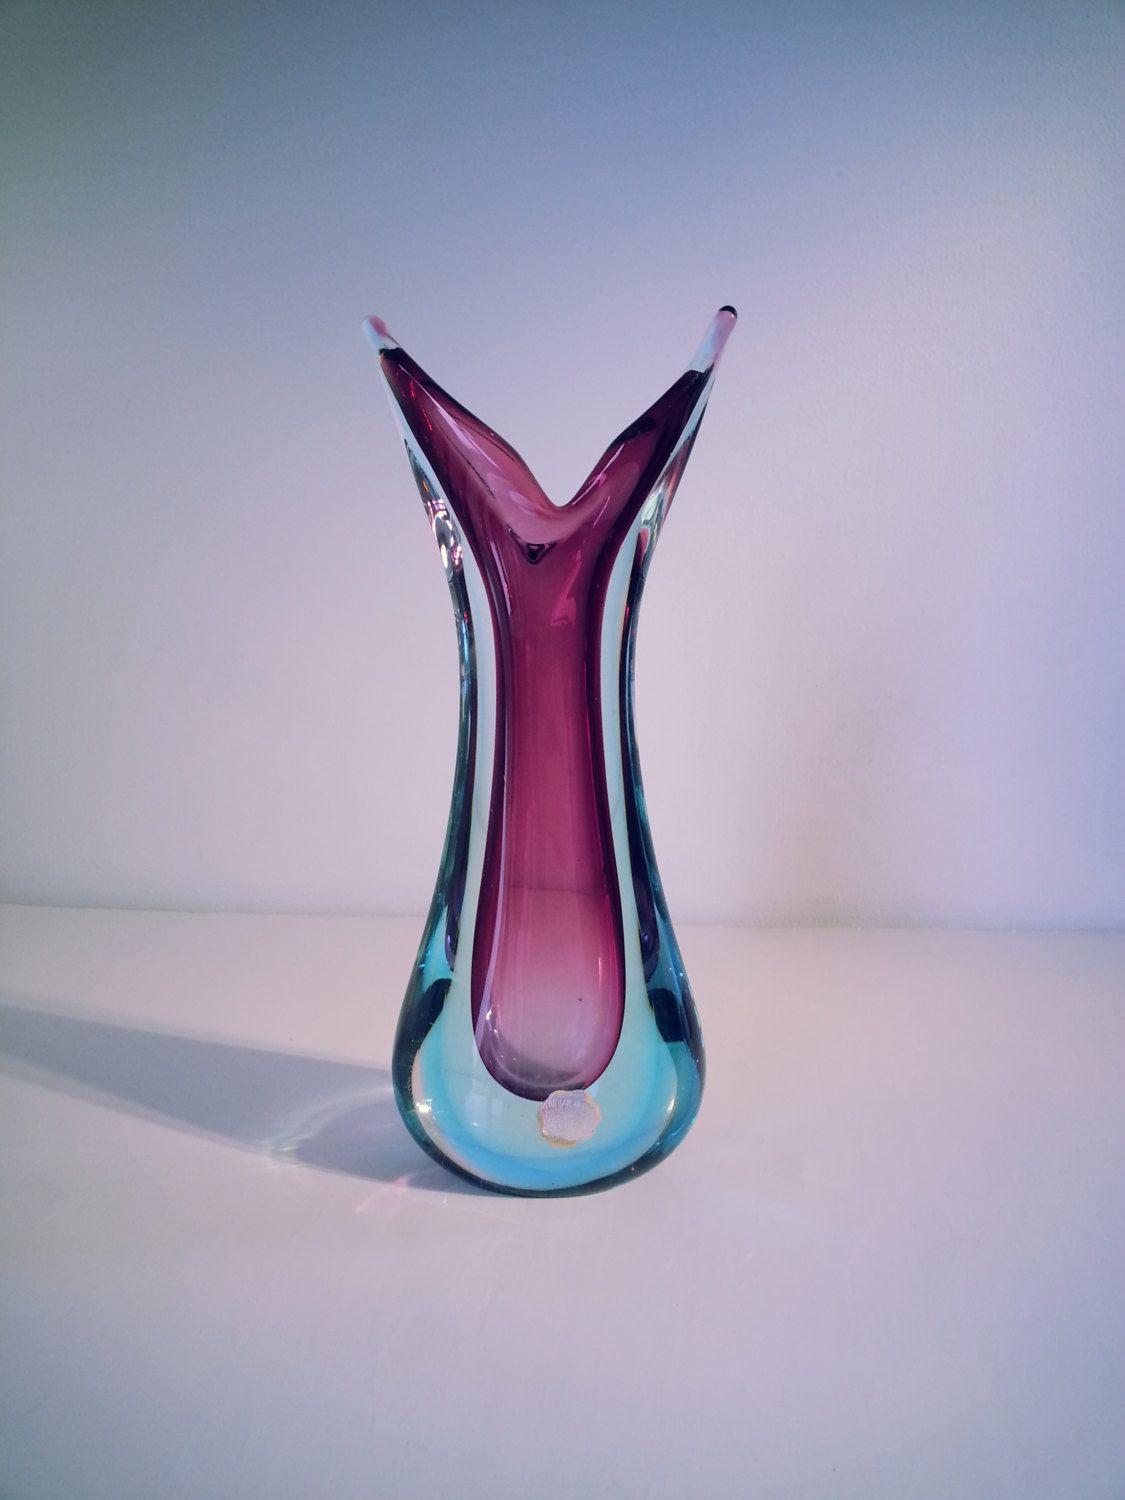 14 Fantastic Blush Pink Glass Vase 2024 free download blush pink glass vase of murano sommerso genuine venetian glass 1950s 1960s purple blue with regard to murano sommerso genuine venetian glass 1950s 1960s purple blue glass vase pulled design